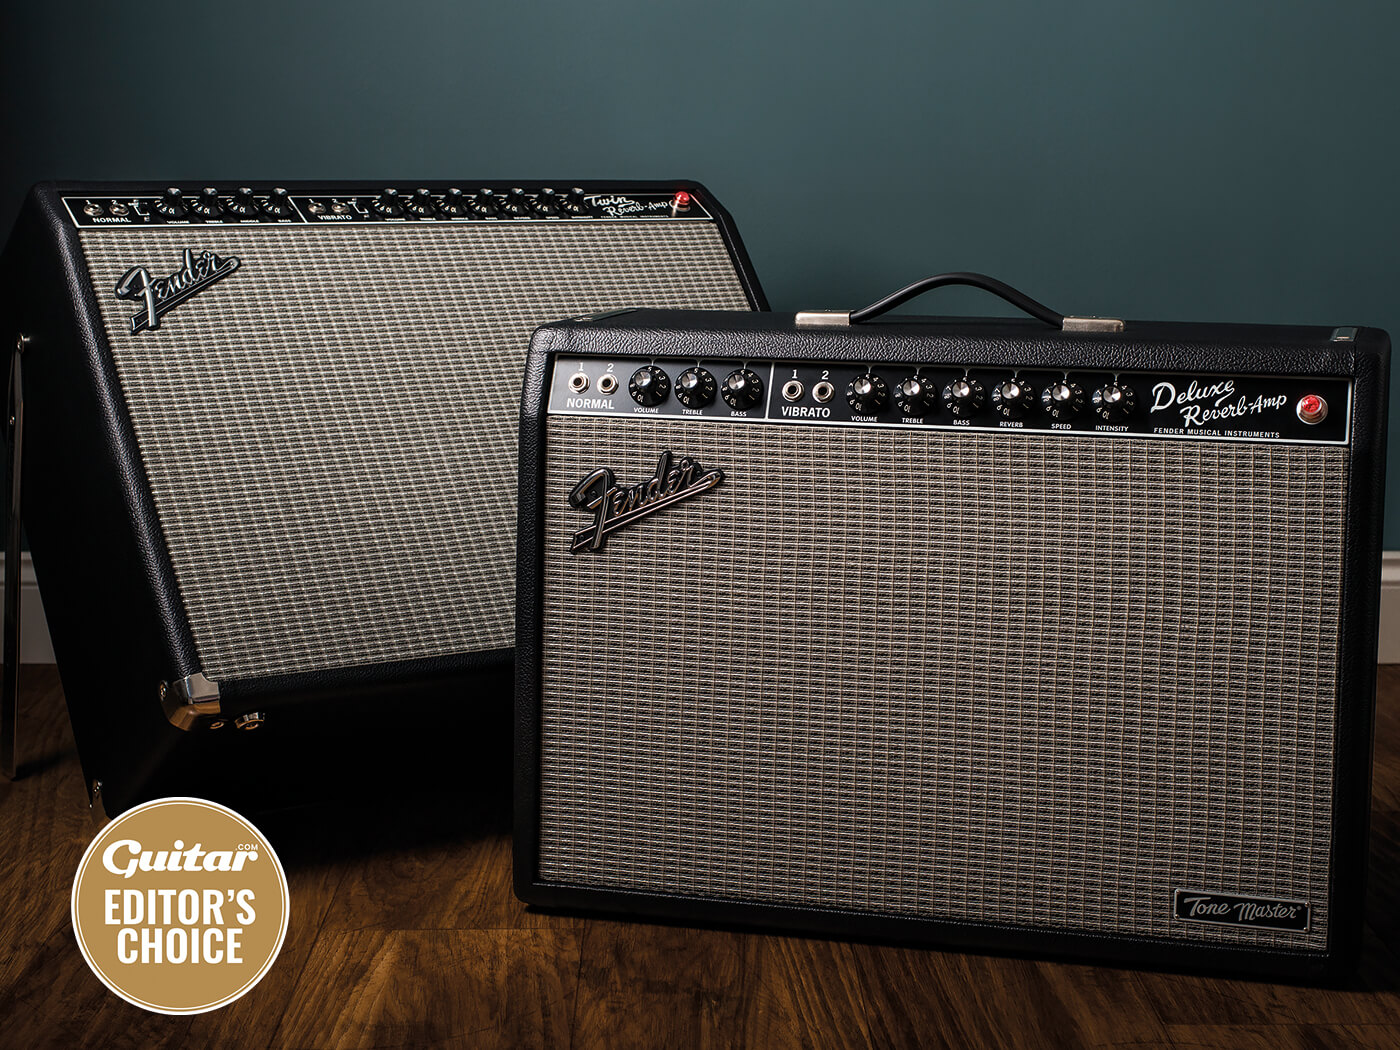 Review: Fender Tone Master Deluxe Reverb and Twin Reverb